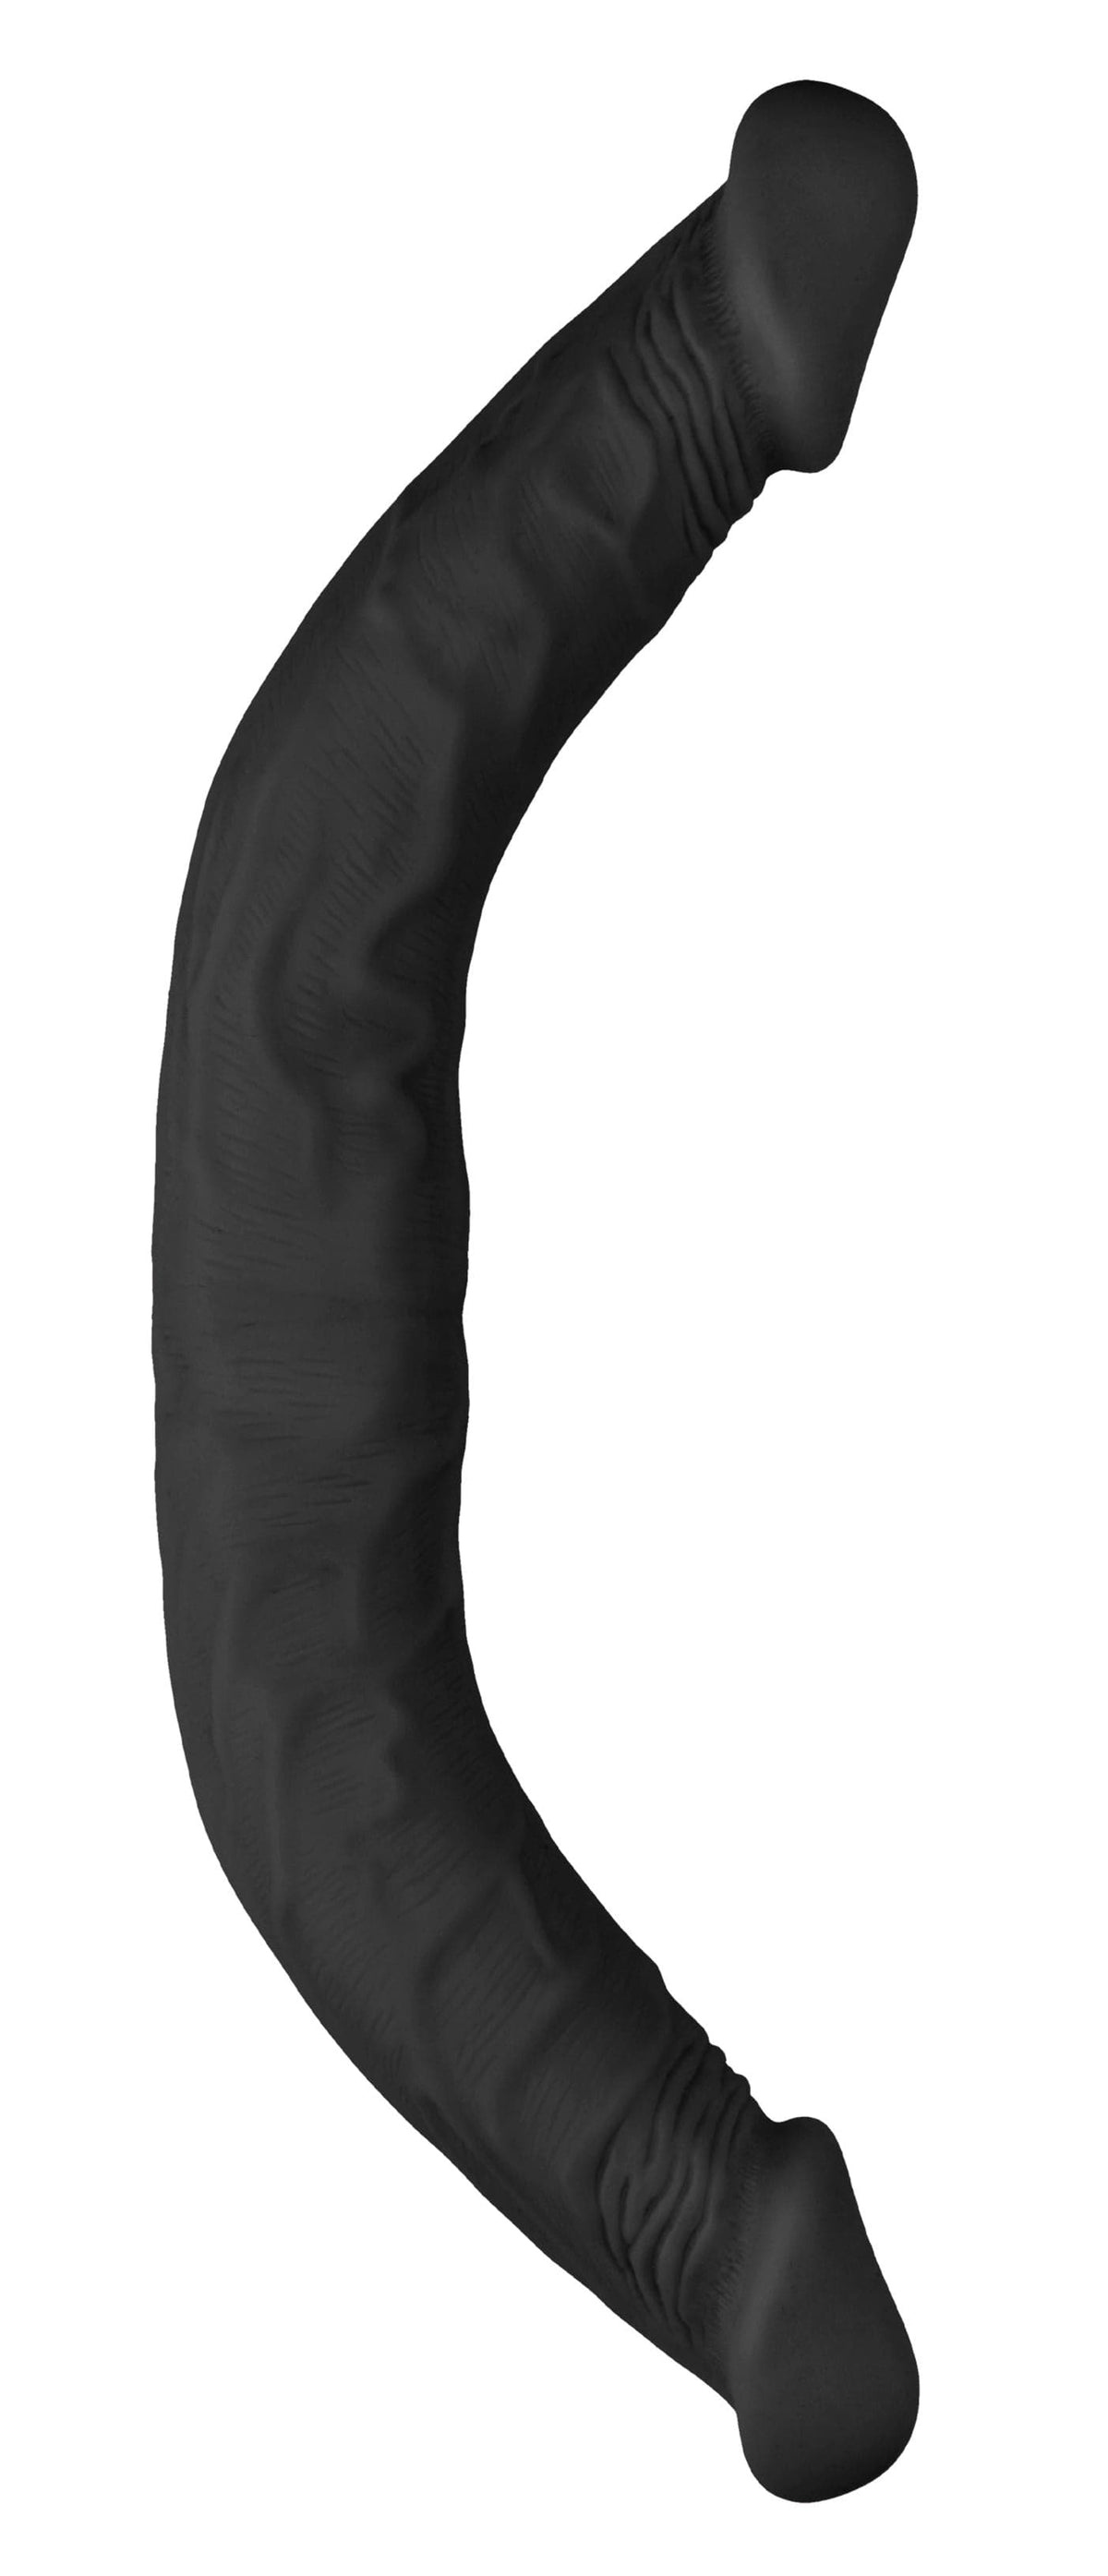 18 inch double dong black